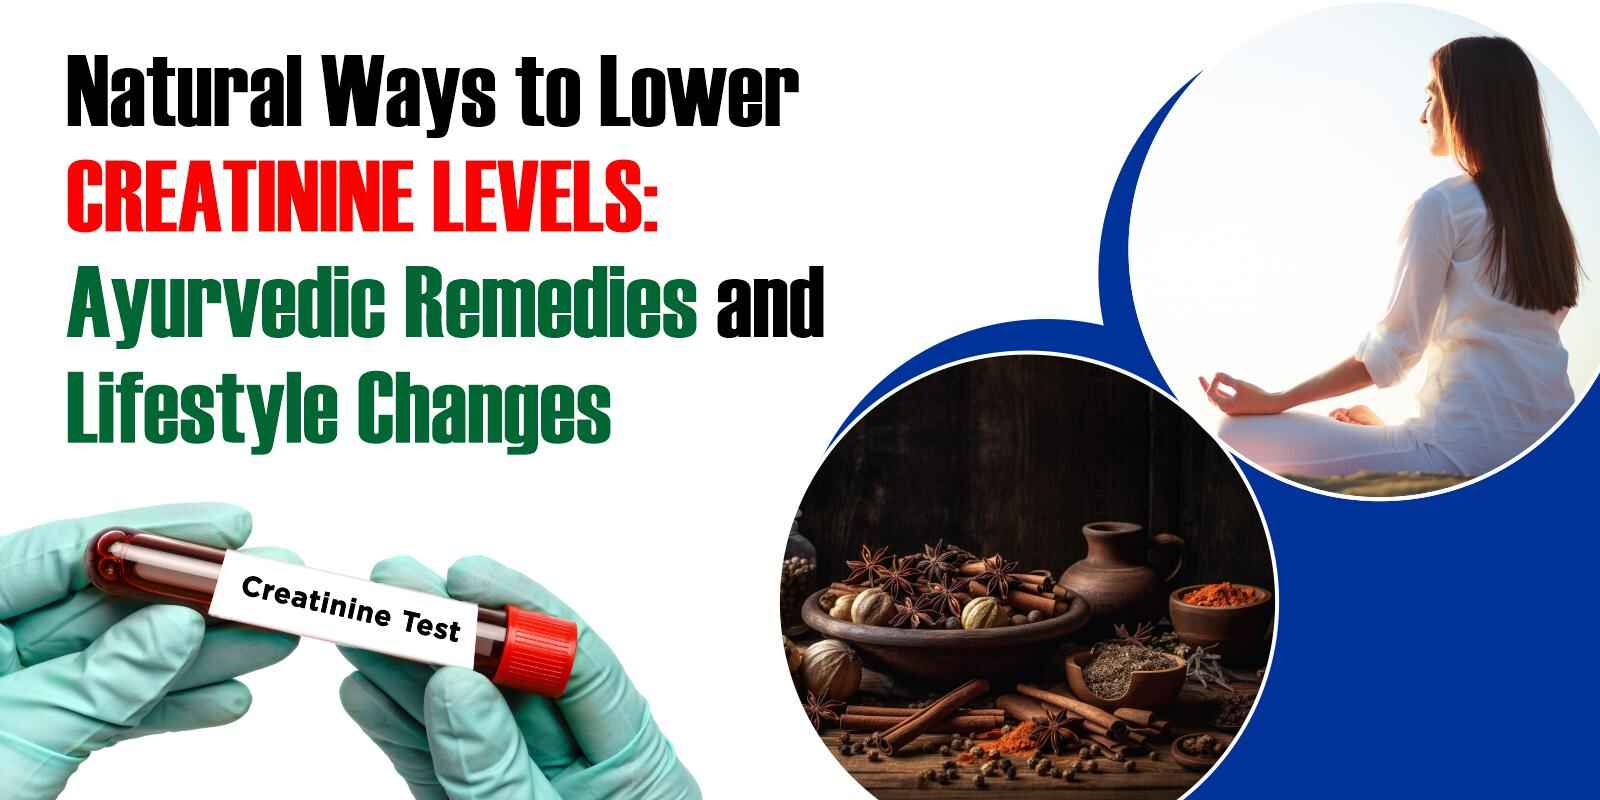 Natural Ways to Lower Creatinine Levels: Ayurvedic Remedies and Lifestyle Changes